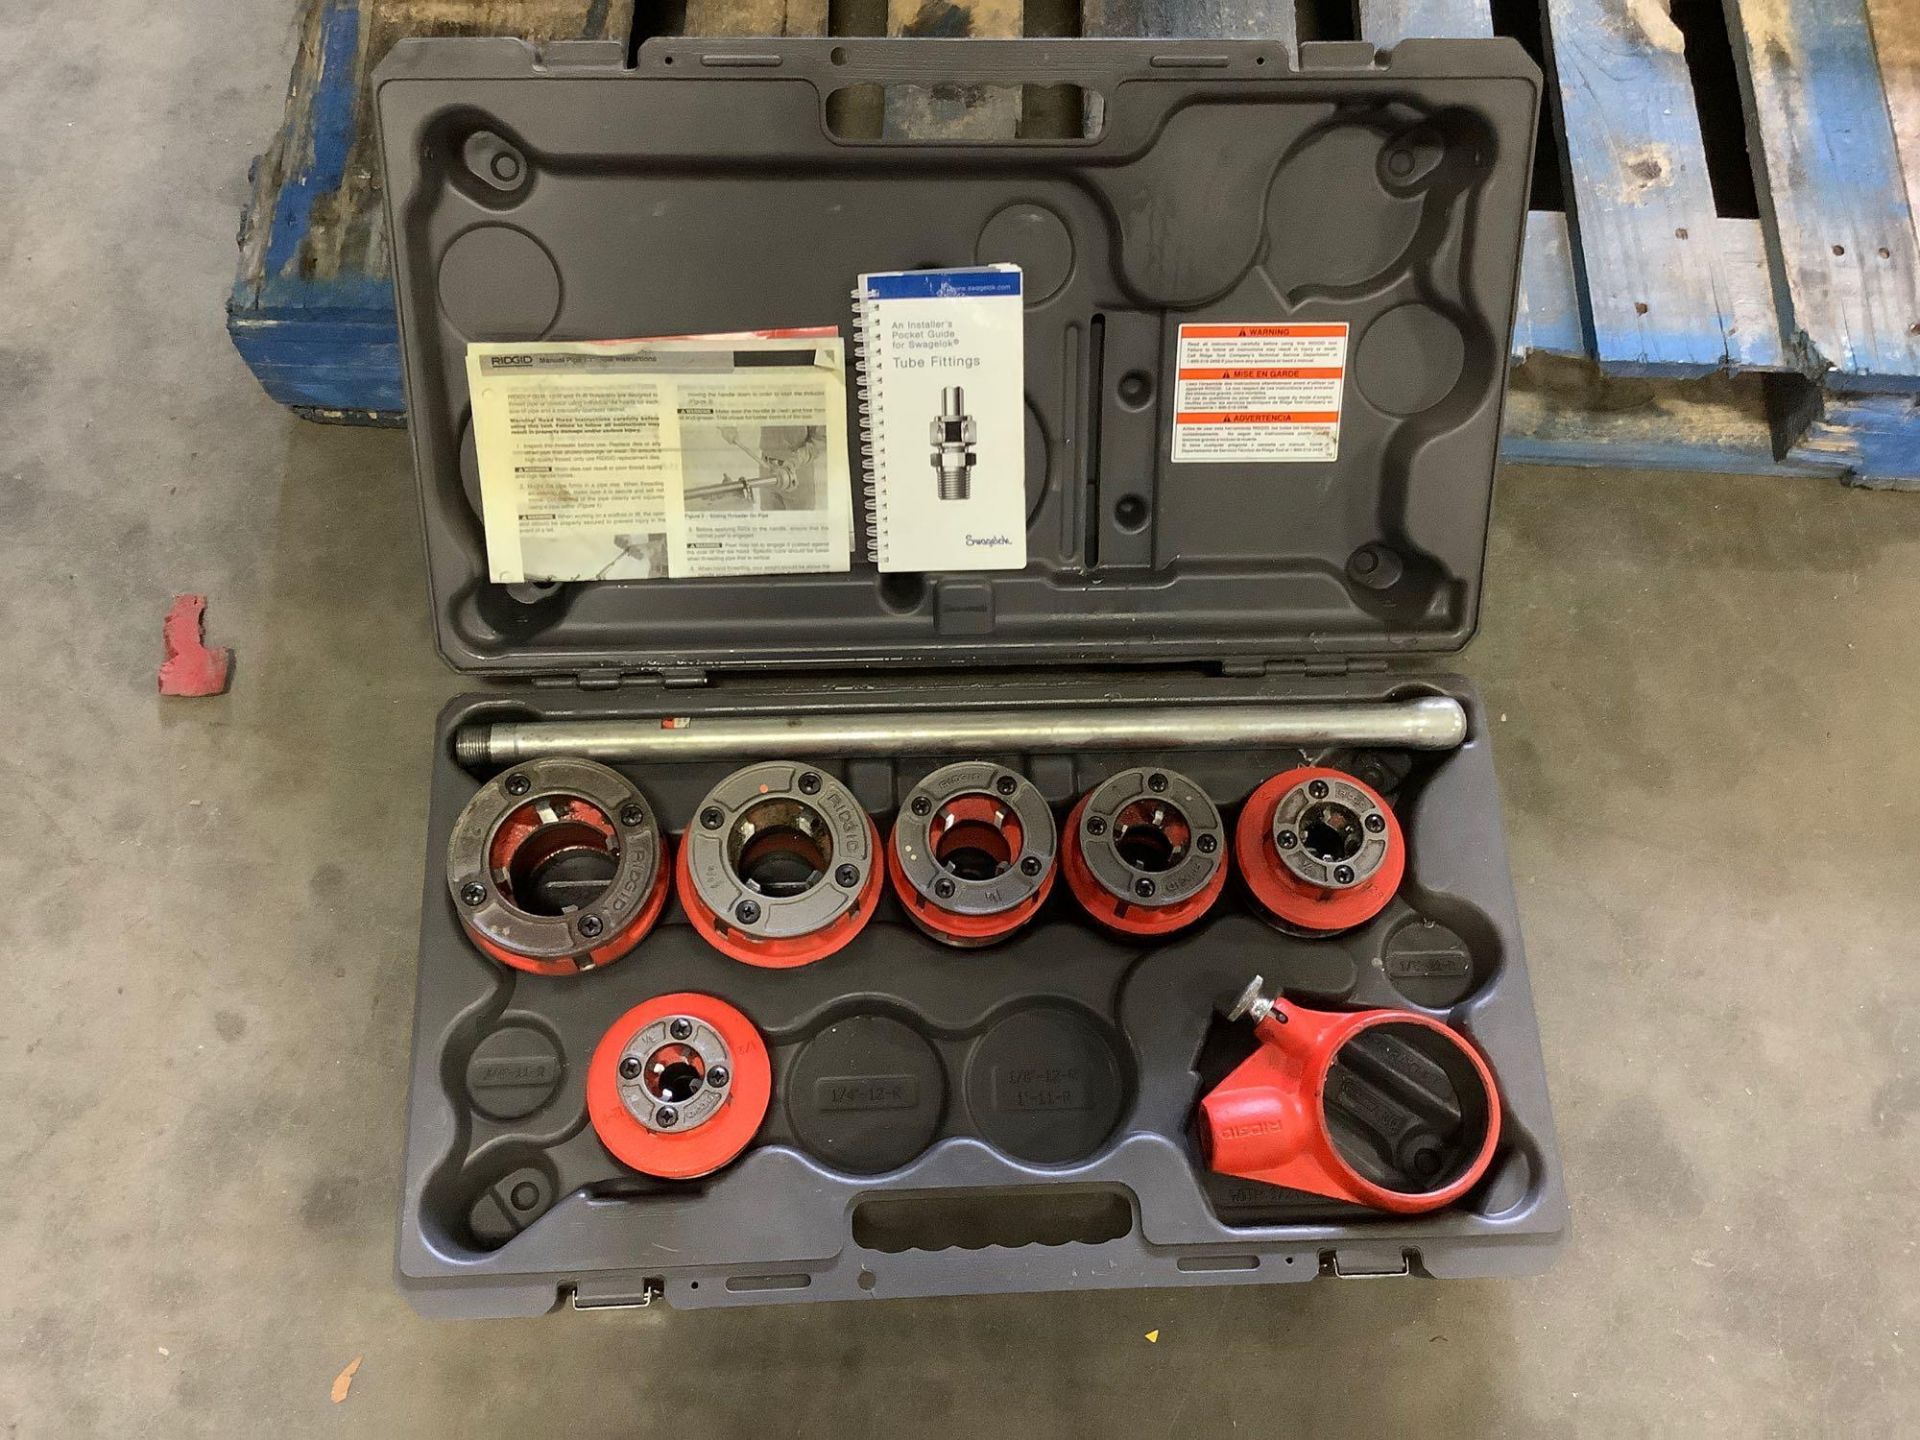 MANUAL RIDGID THREADER SET WITH CARRYING CASE